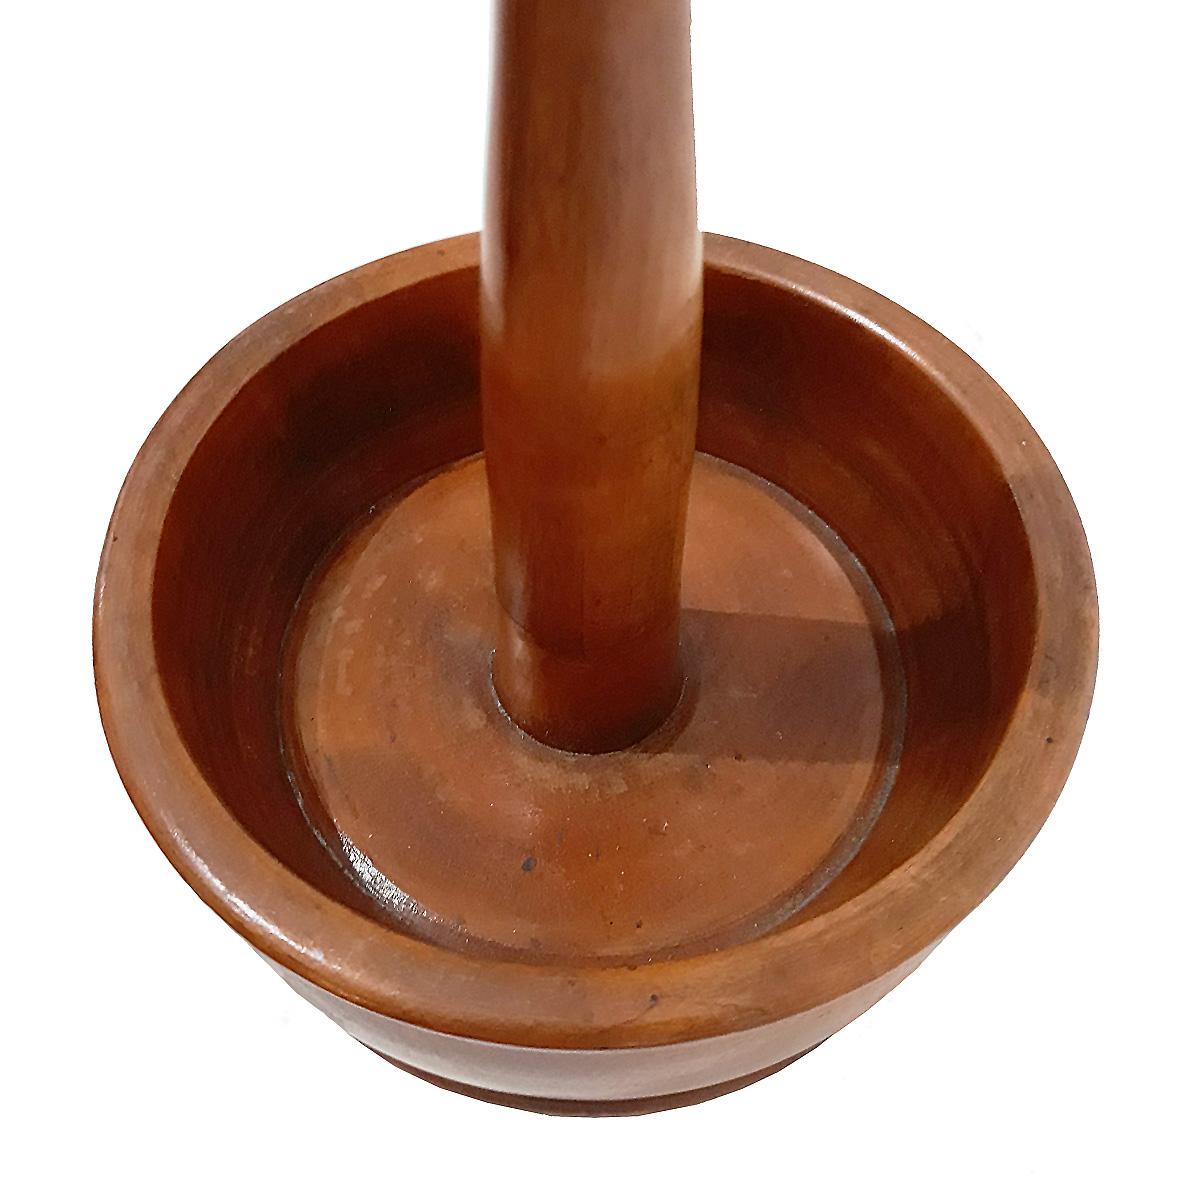 Mid-20th Century Lignum Vitae Turned Lemon Squeezer, from the Carter Burden Jr. Collection For Sale